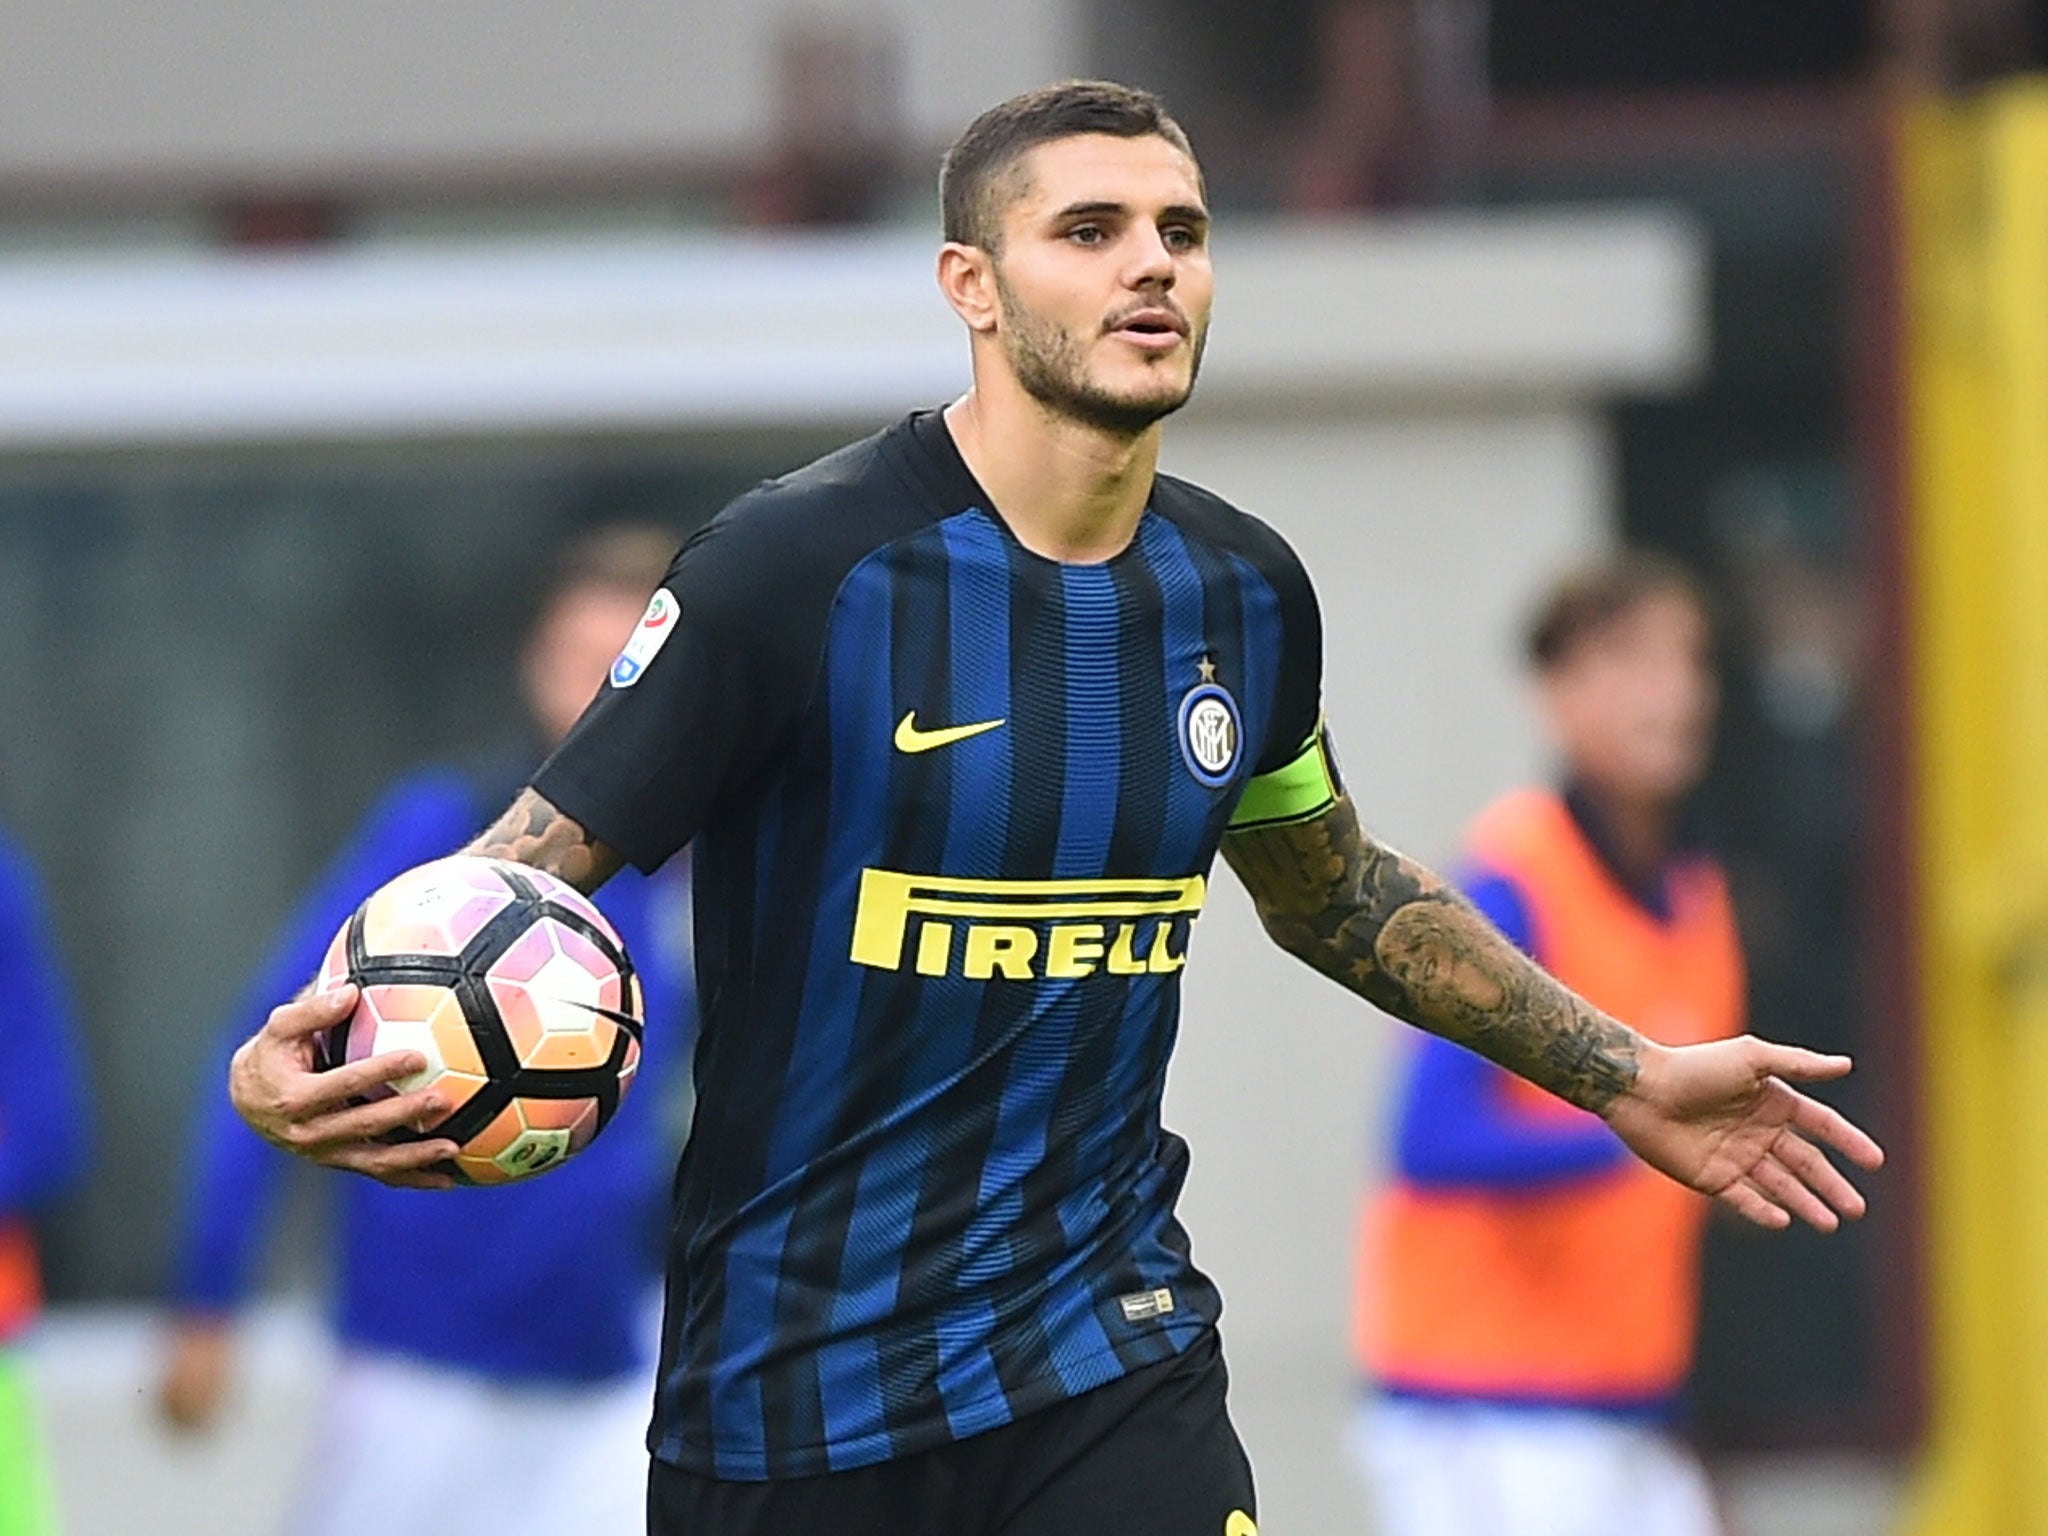 Inter Milan fans call Mauro Icardi 'vile piece of s***' and demand player  gives up his captaincy, The Independent